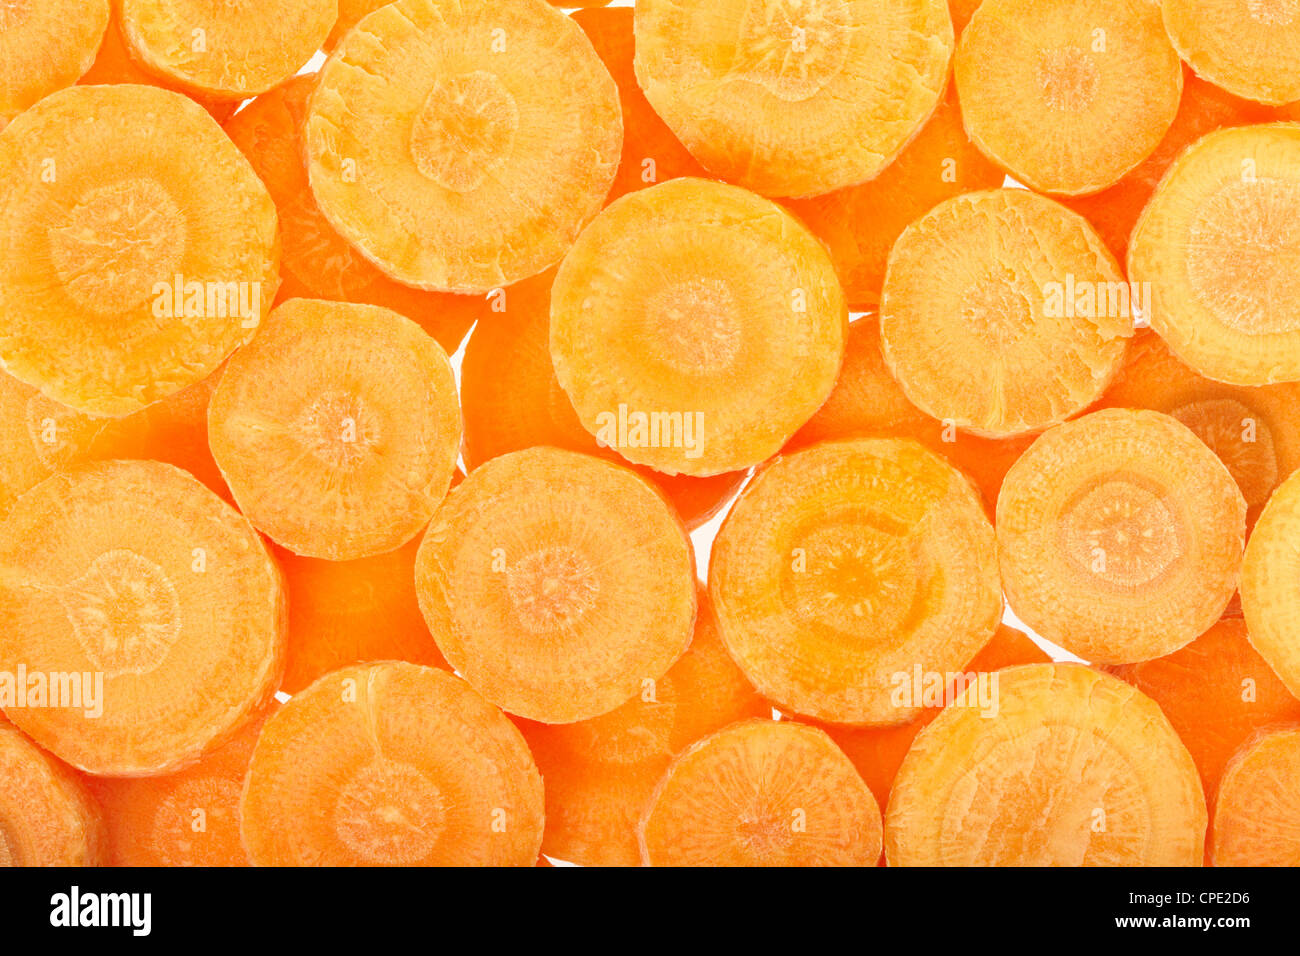 Sliced carrots texture background Stock Photo